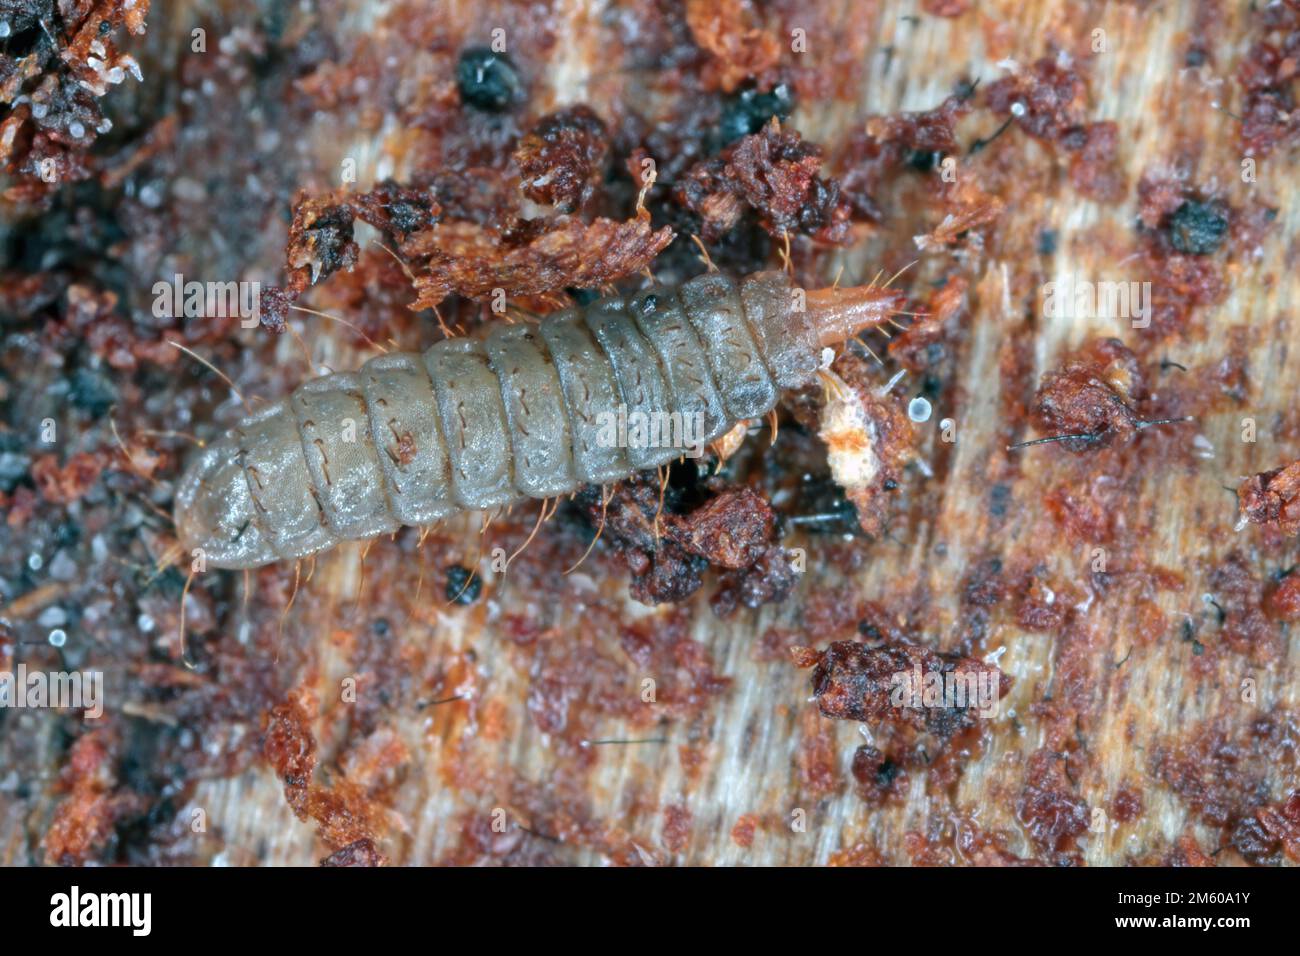 Soldier fly larva on rotten wood (Stratiomyidae) Stock Photo